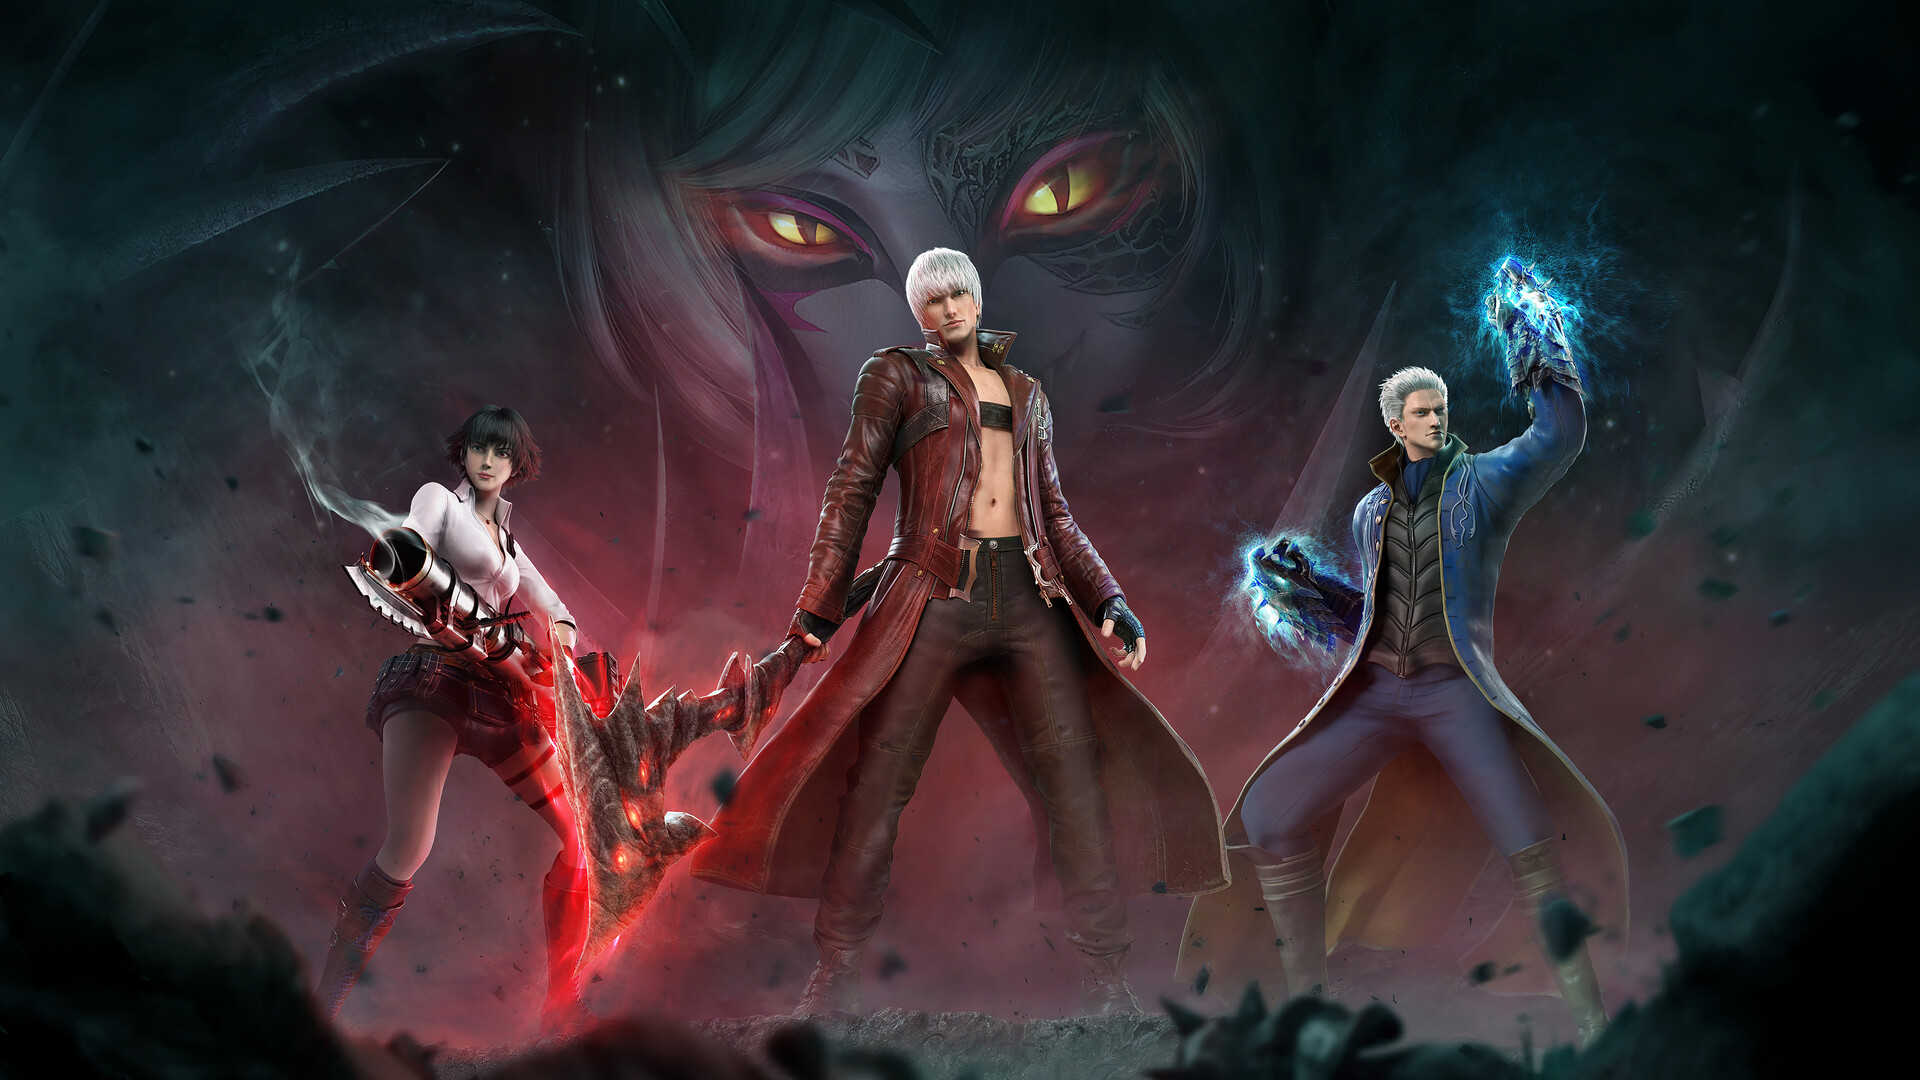   Devil May Cry 6:  Android      Devil May Cry: Peak of Combat,     Capcom